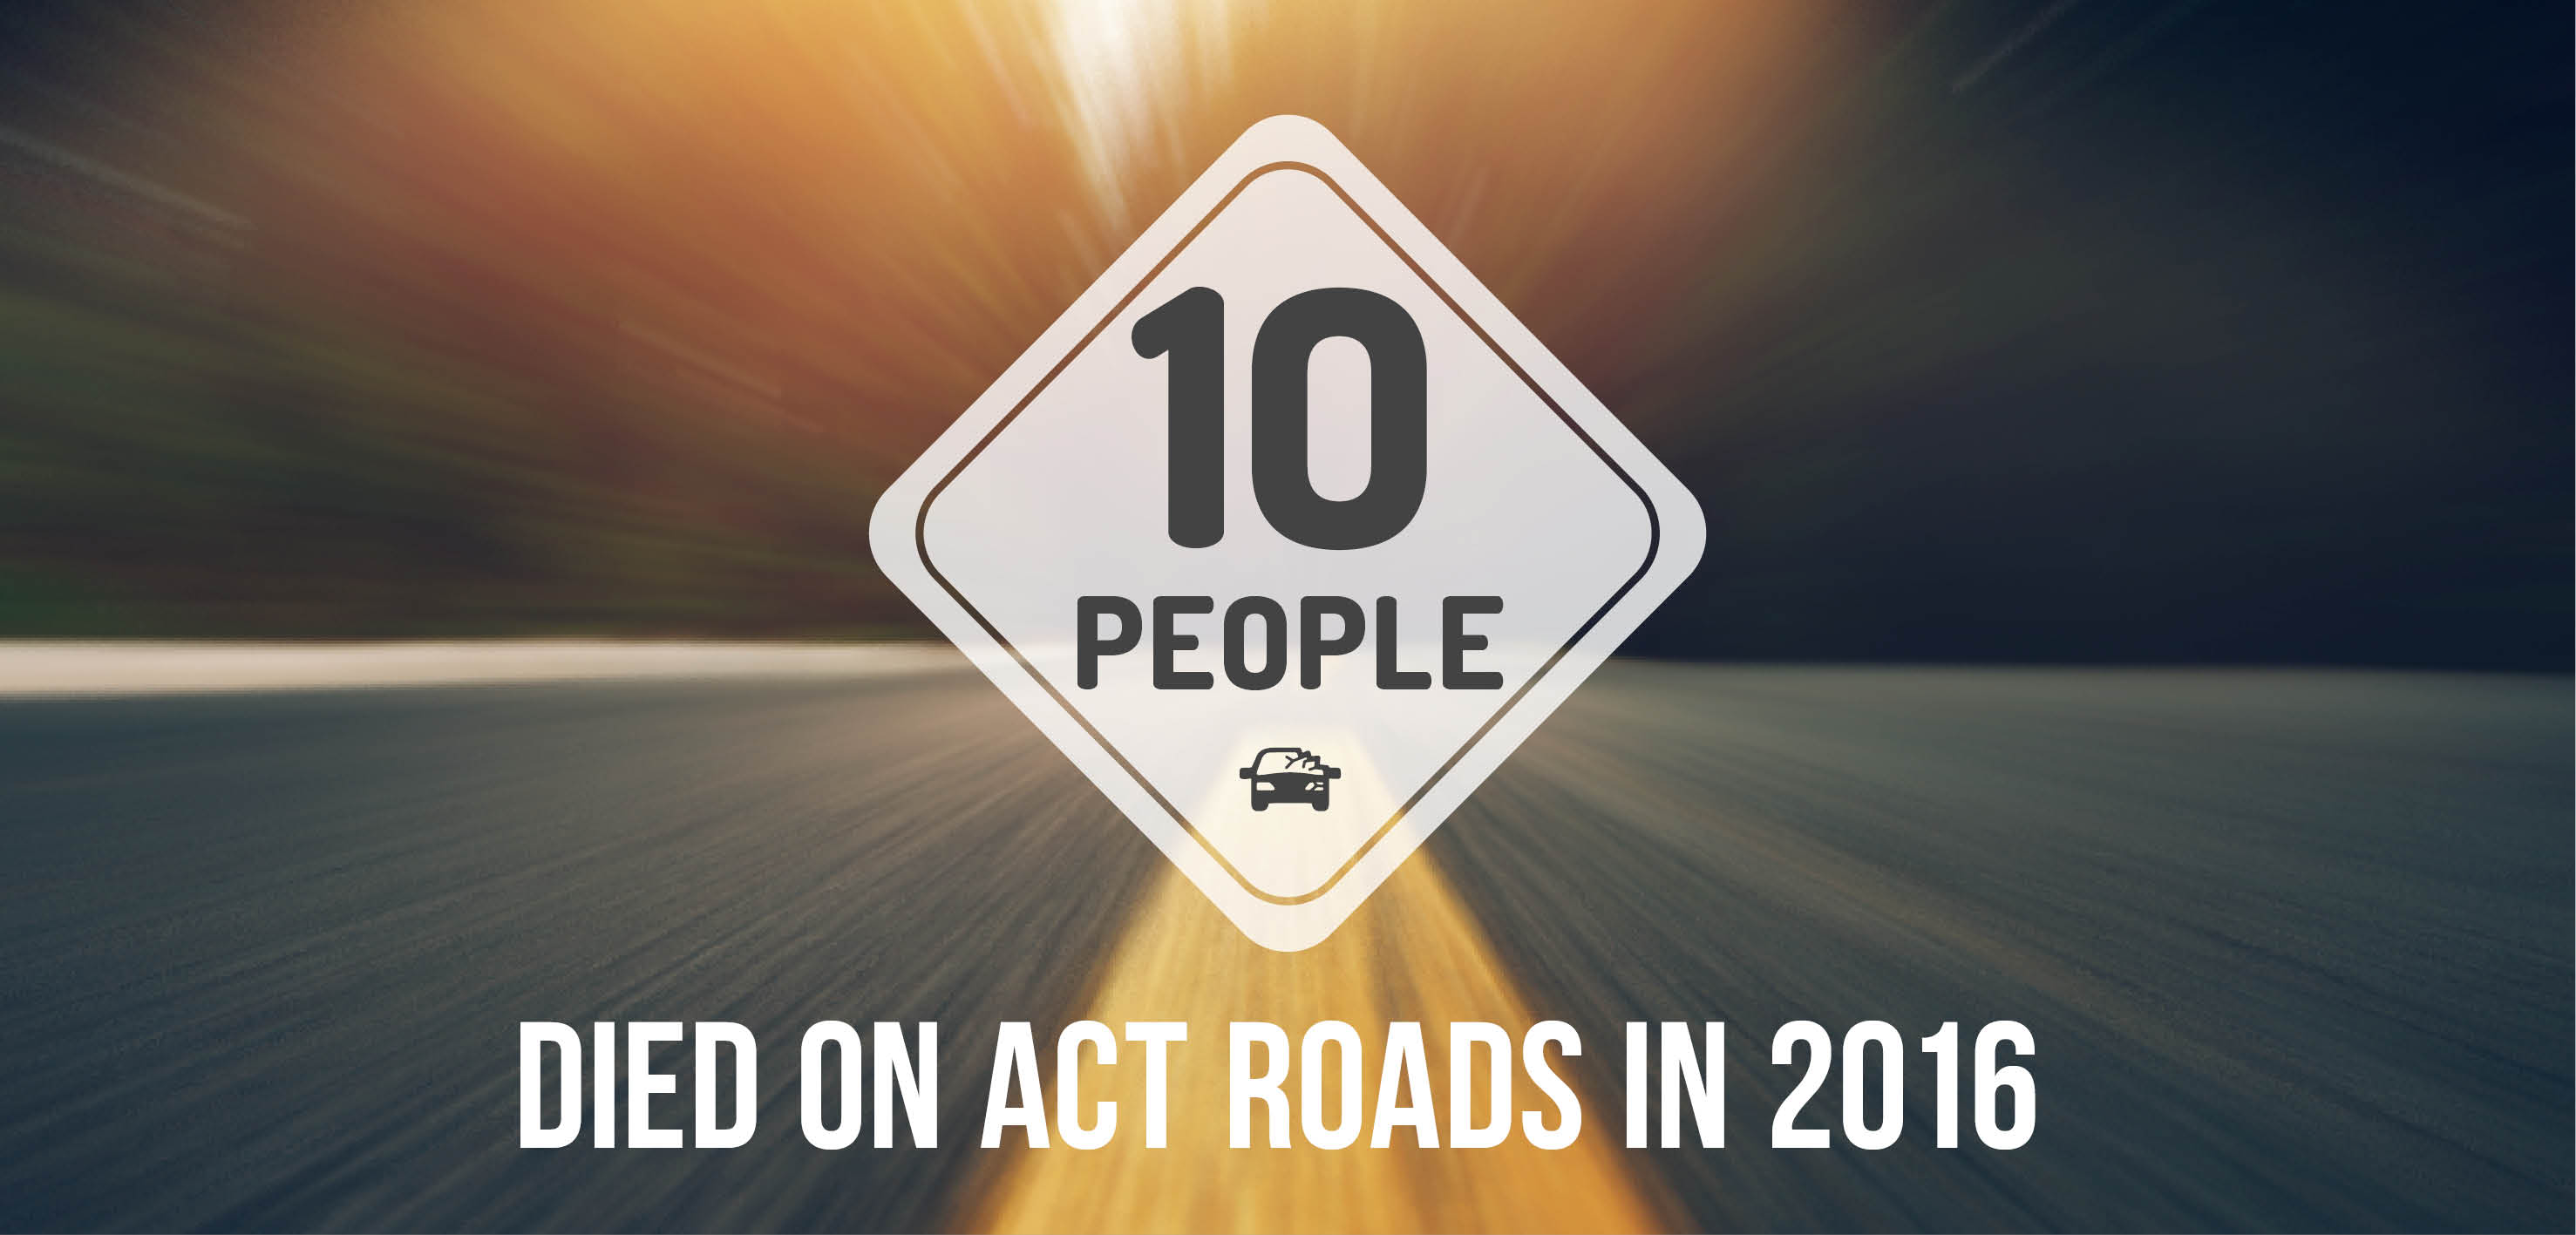 10 people died on ACT roads in 2016